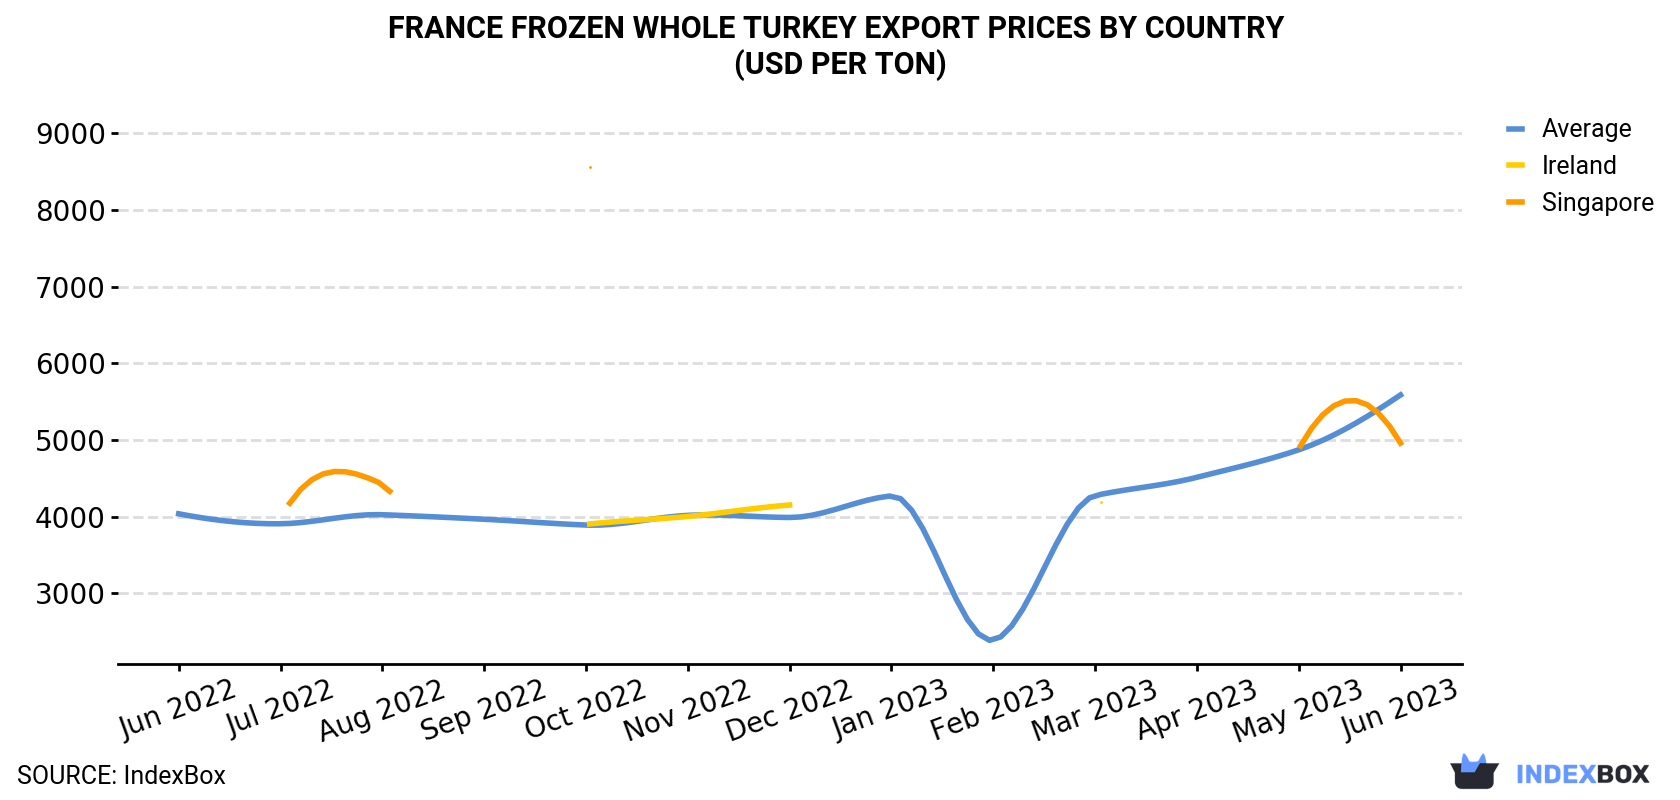 France Frozen Whole Turkey Export Prices By Country (USD Per Ton)